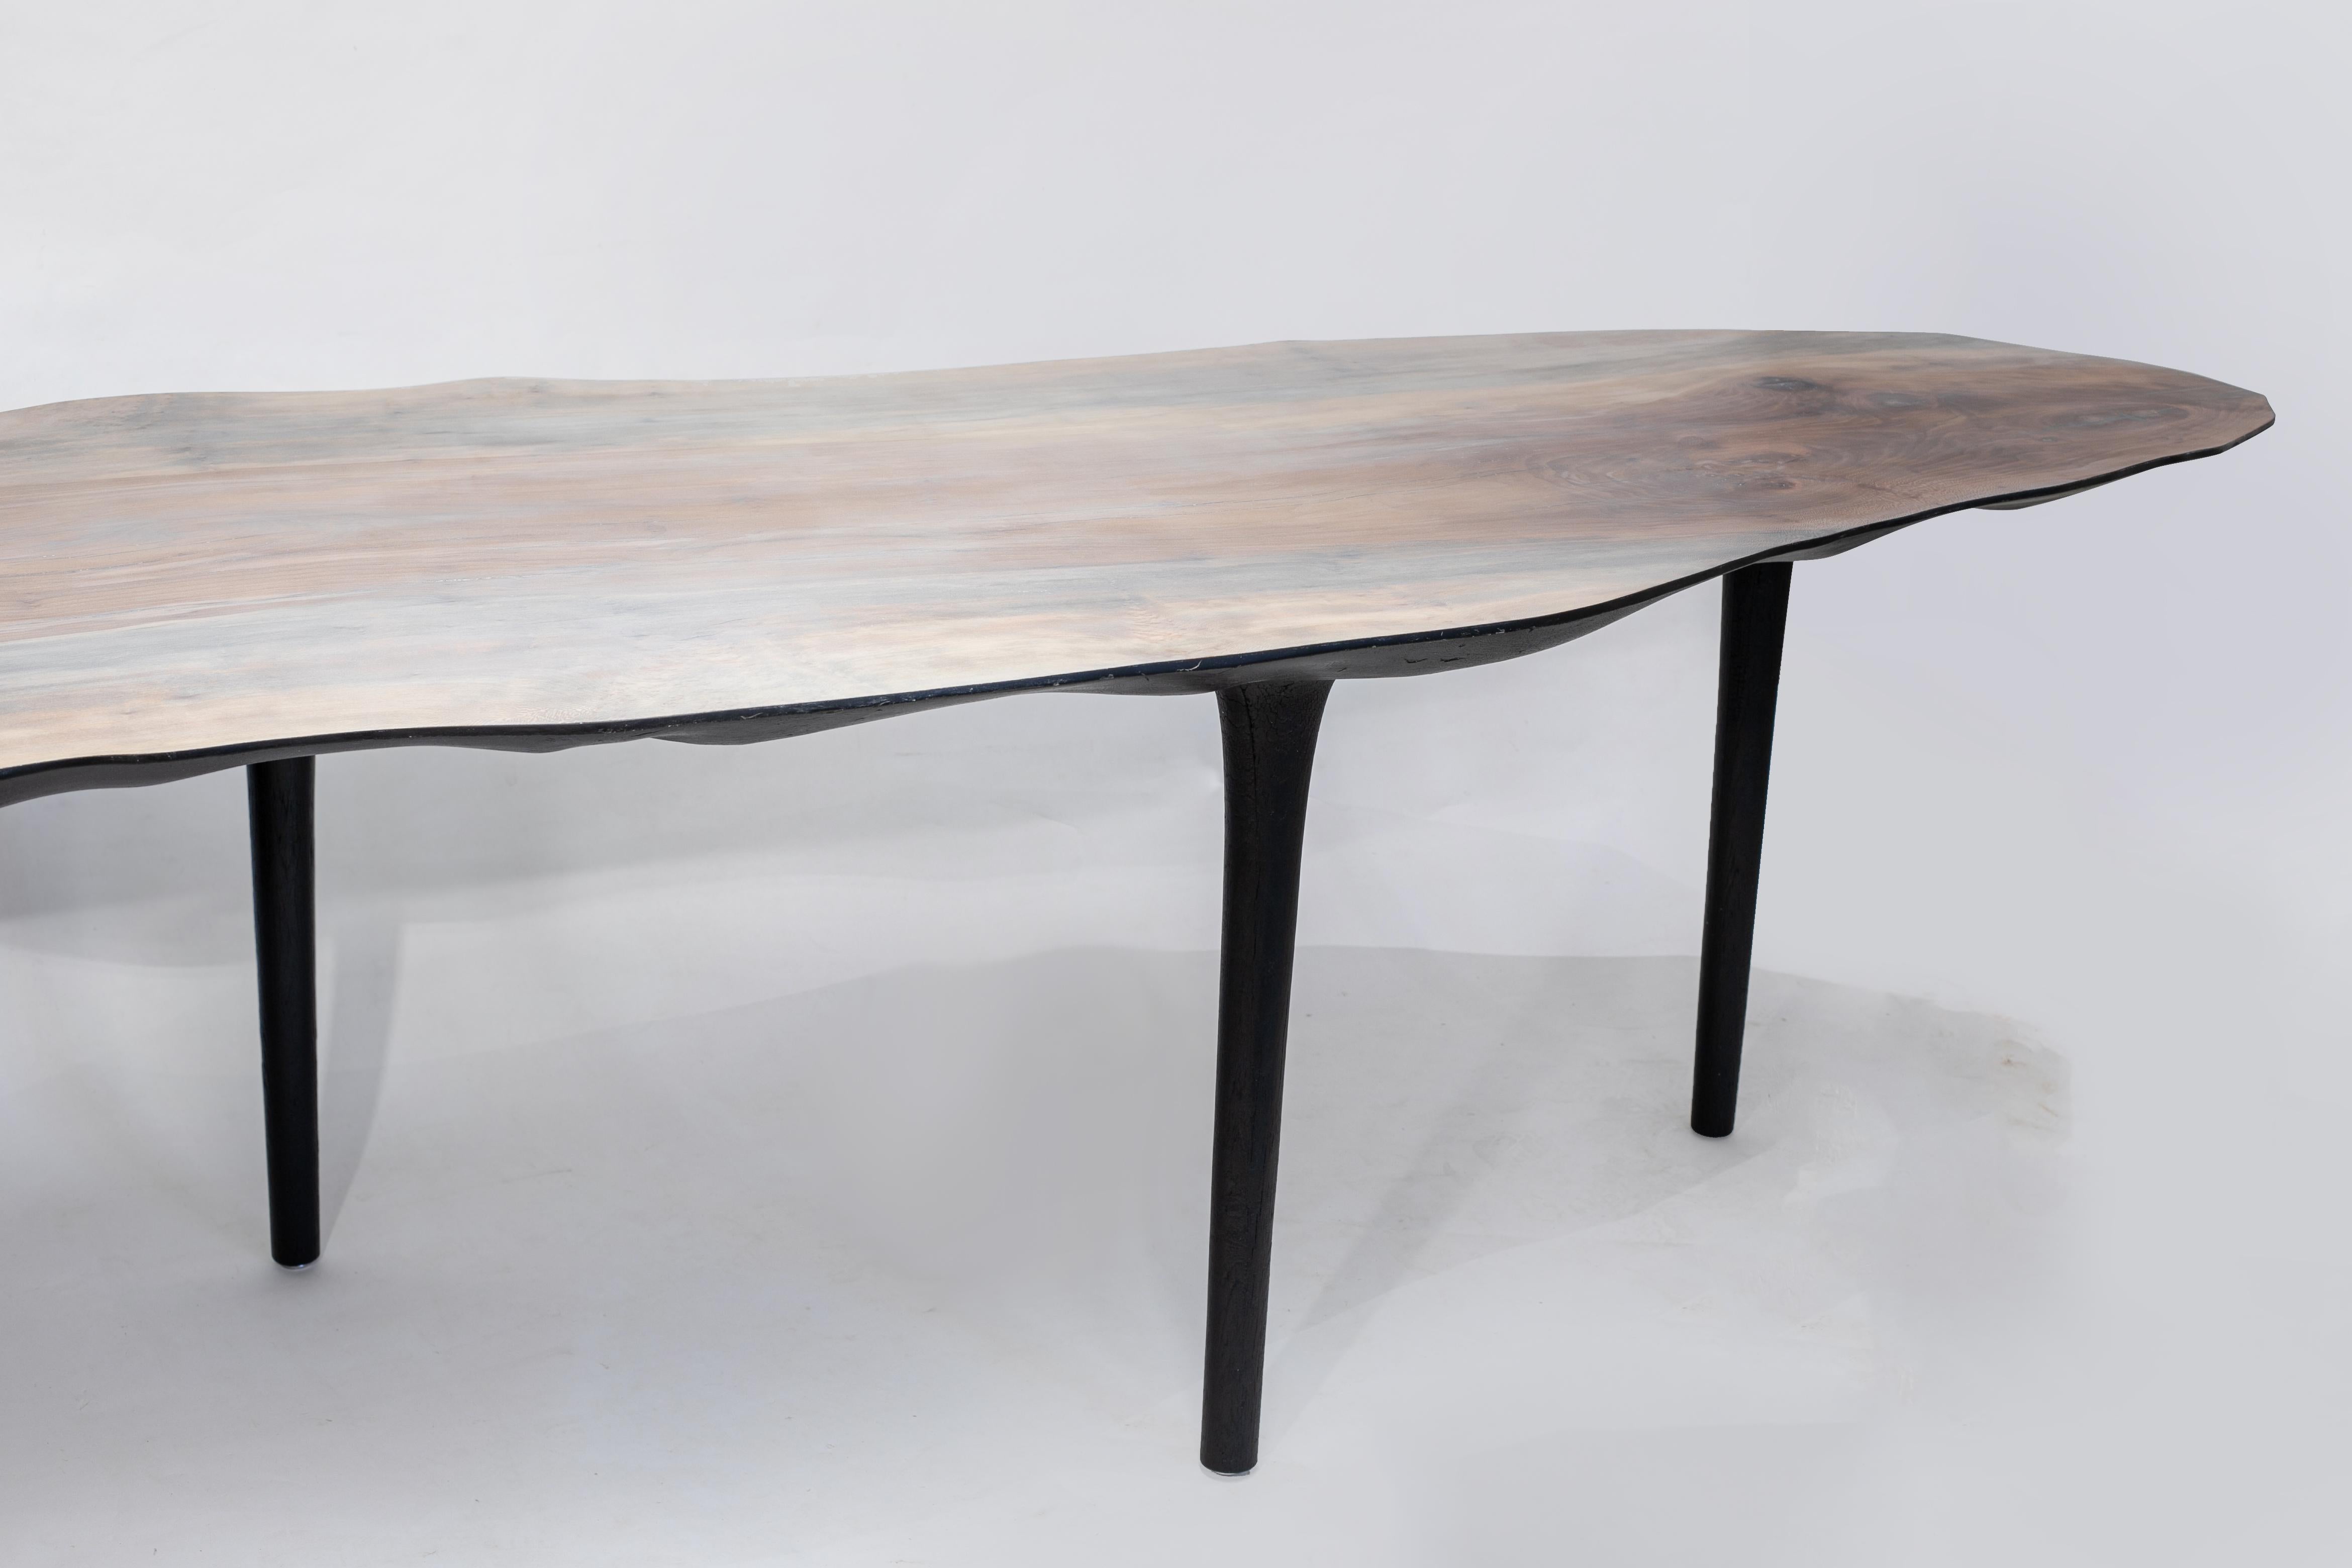 Unique sculptural dining table Signed by Cedric Breisacher
Hand-sculpted and signed by Cedric Breisacher
Dimension: H 76 cm x P 90 cm x L 282 cm
Plane Tree
The finish and the dimensions can be customized

Designer-sculptor, Cedric Breisacher